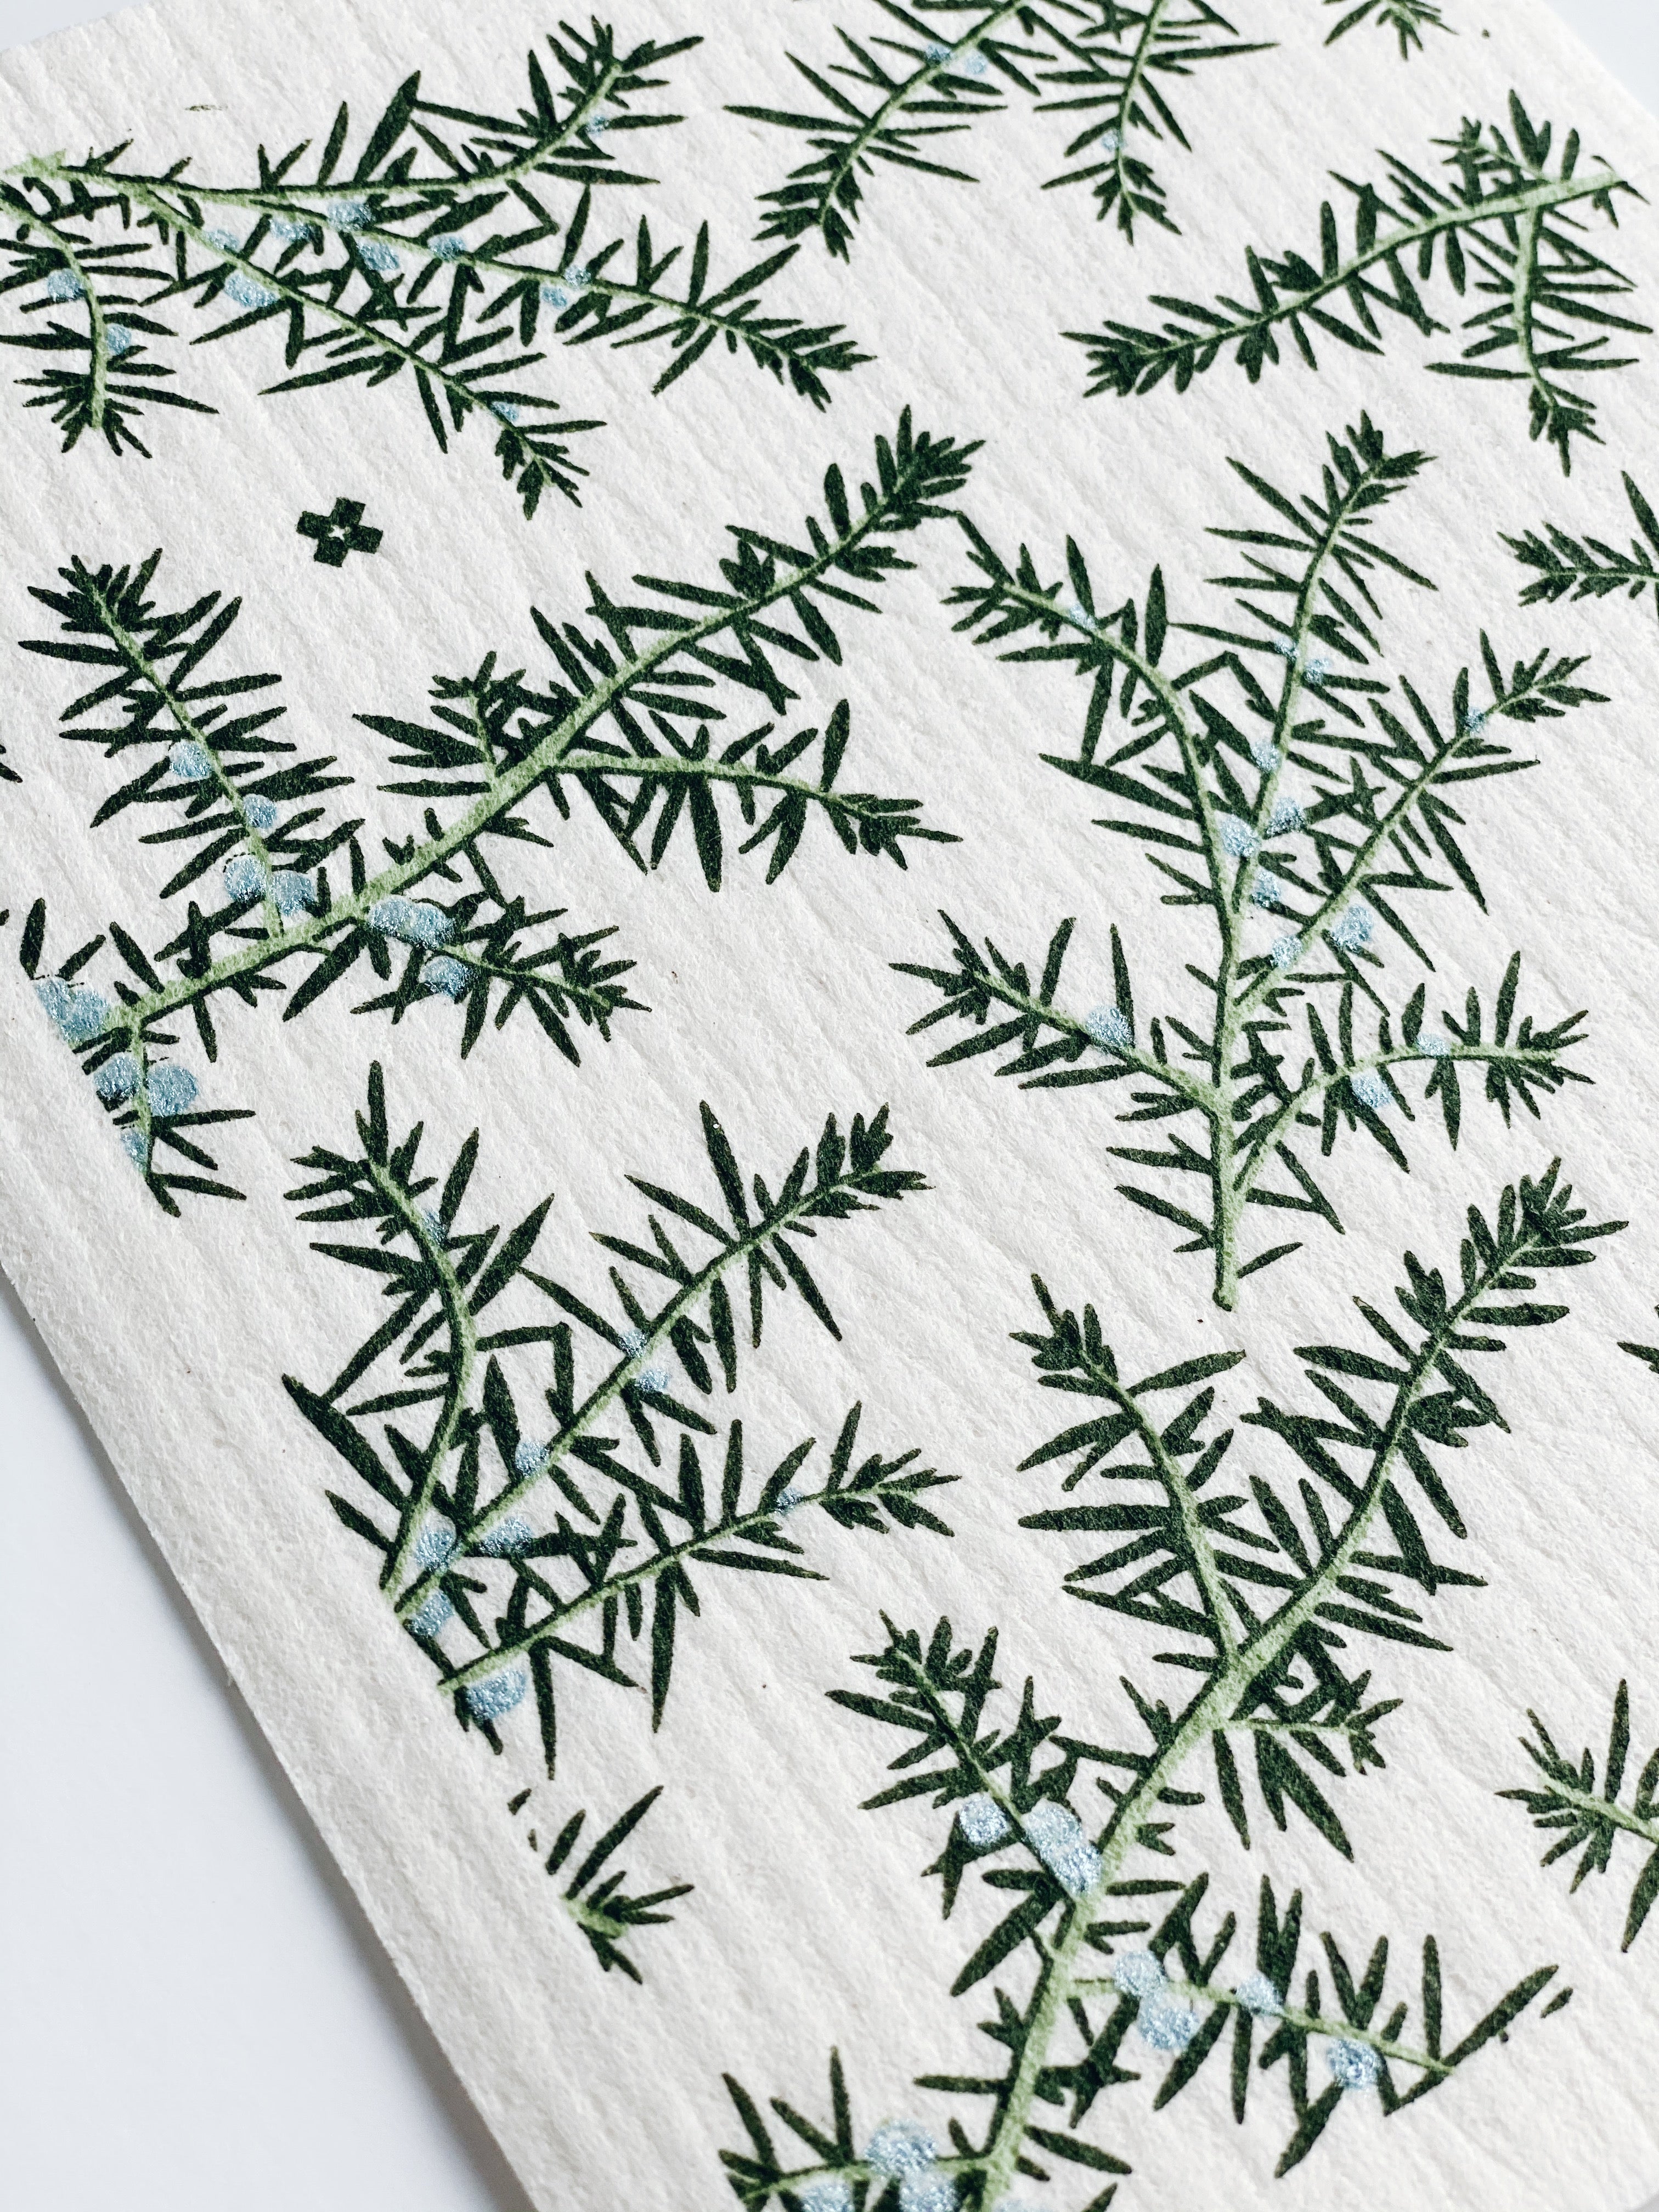 Close up product image of Juniper Greens on White sponge cloth.